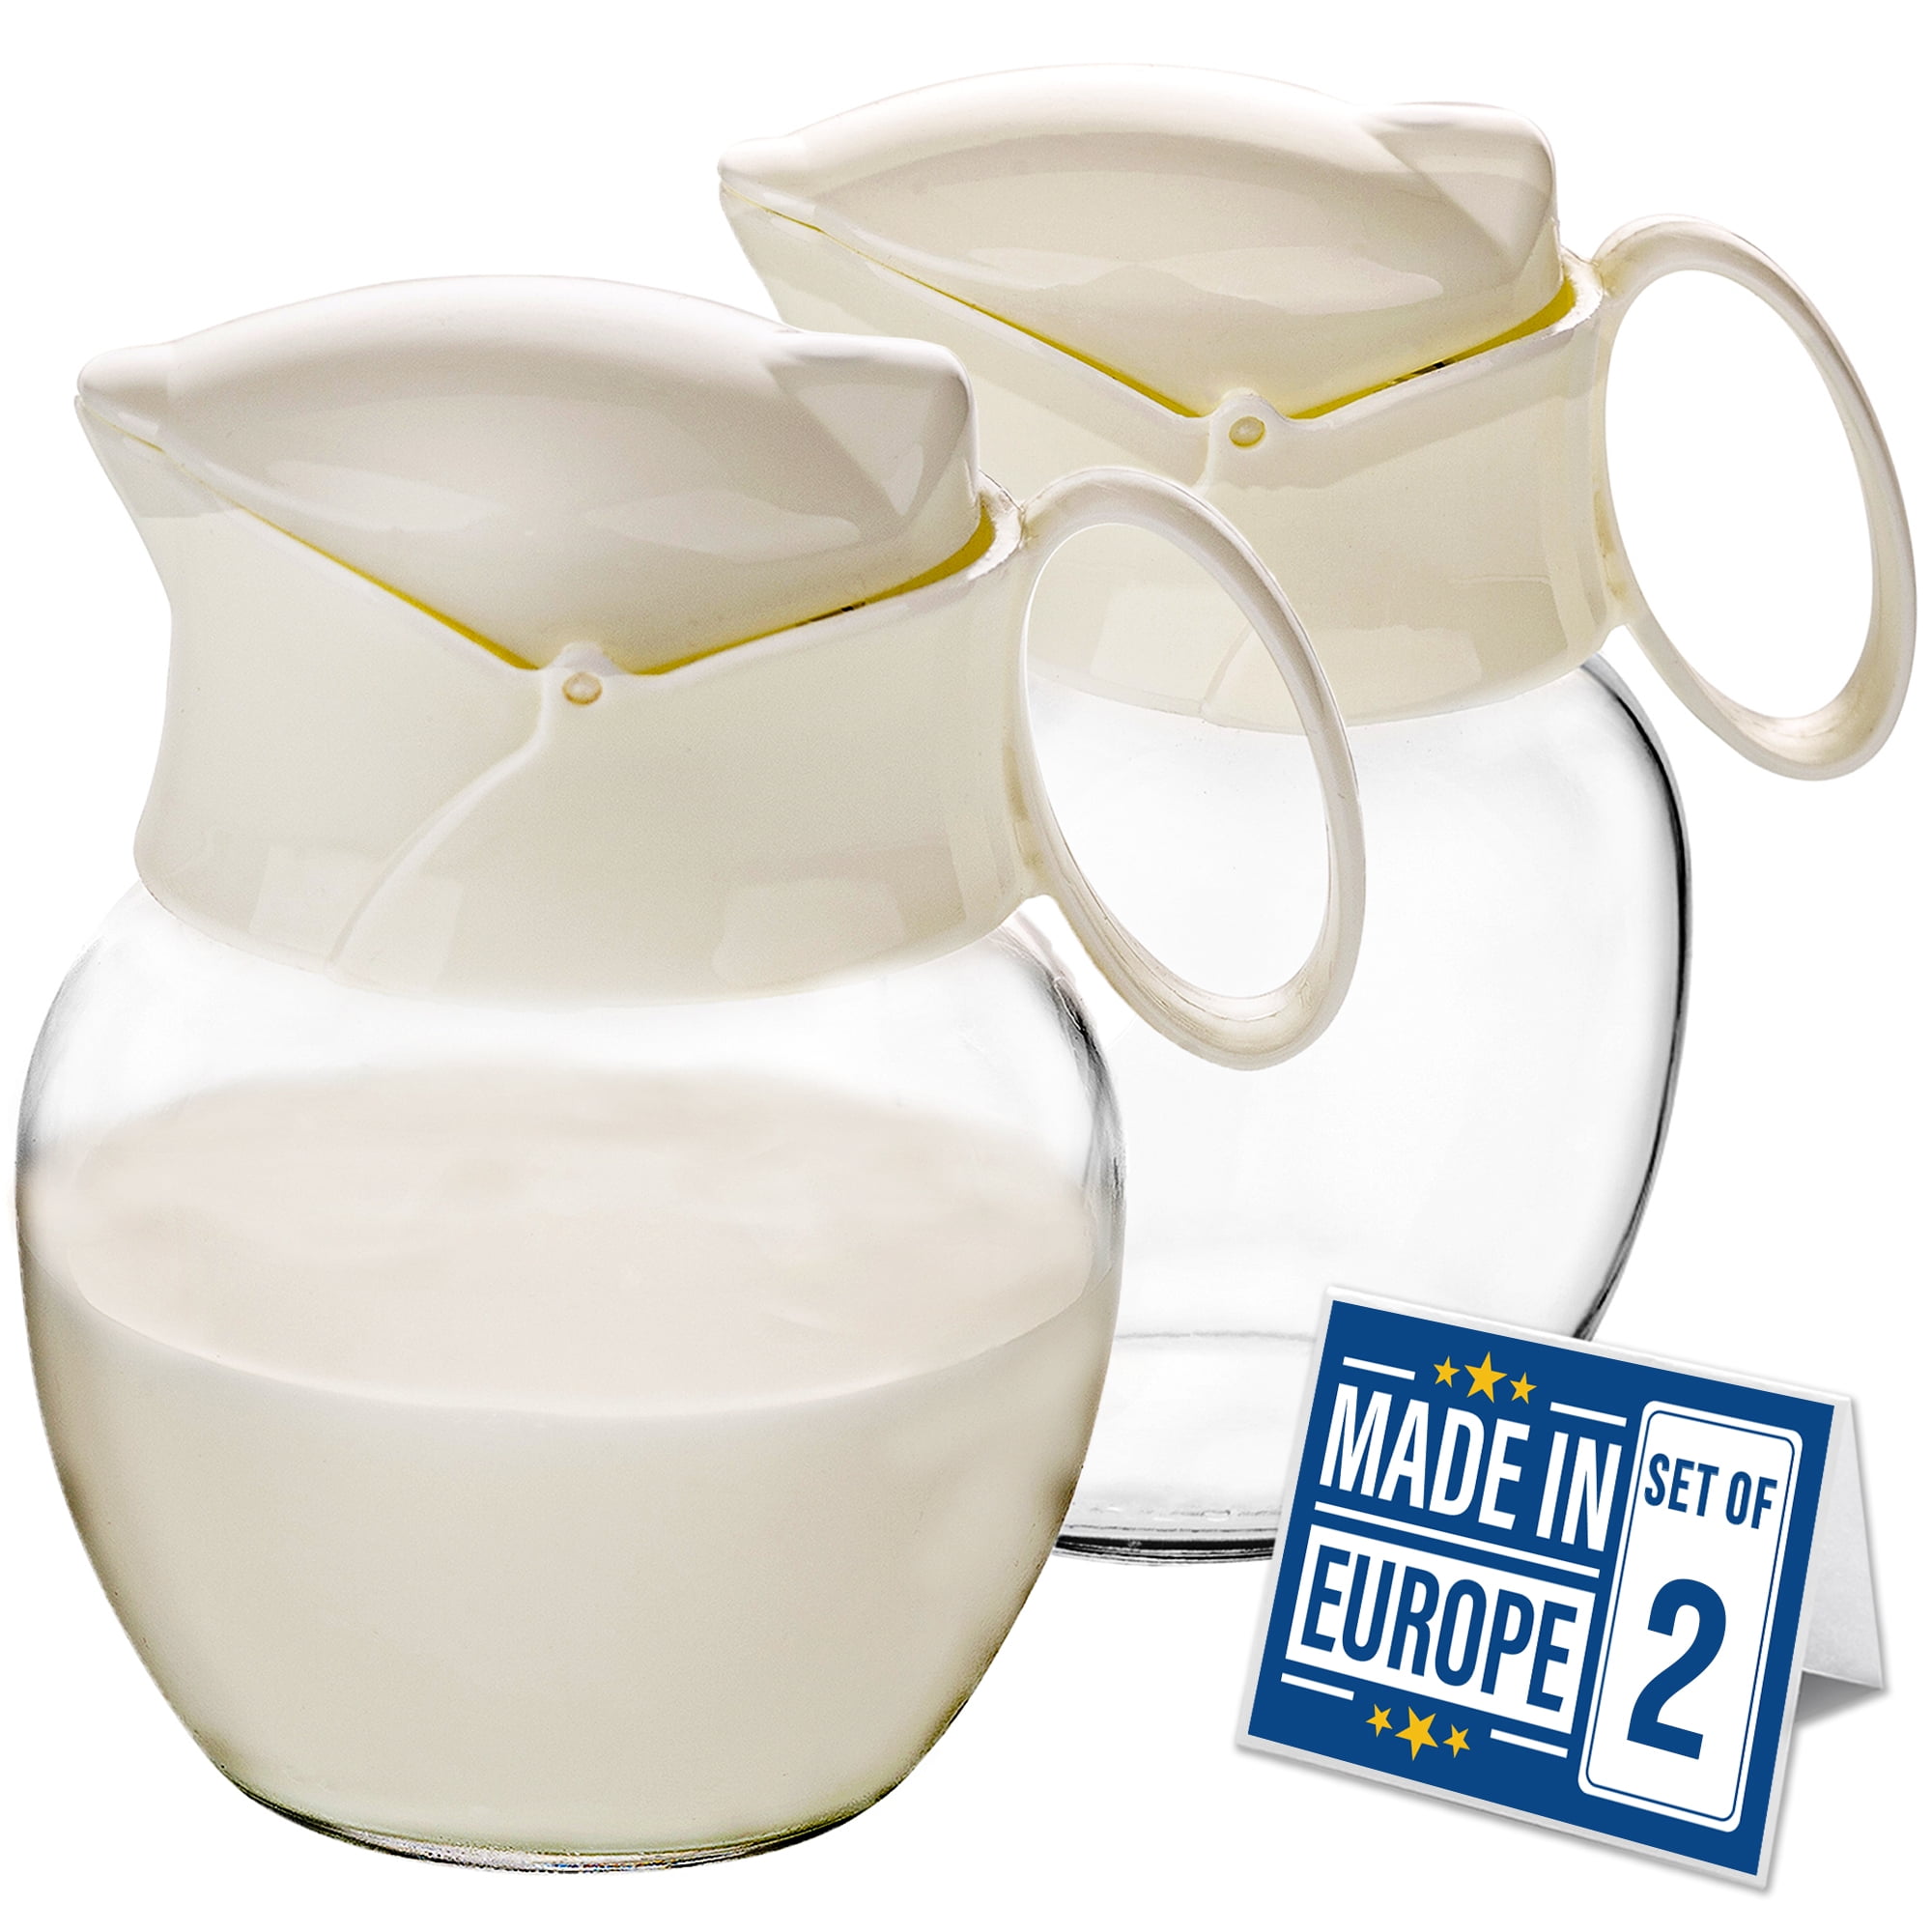 Gurygo 2 oz (Set/2) Creamer Pitcher with Handle,Small Classic White Fine Porcelain Creamer Pitcher, Small Pitcher for Coffee Milk